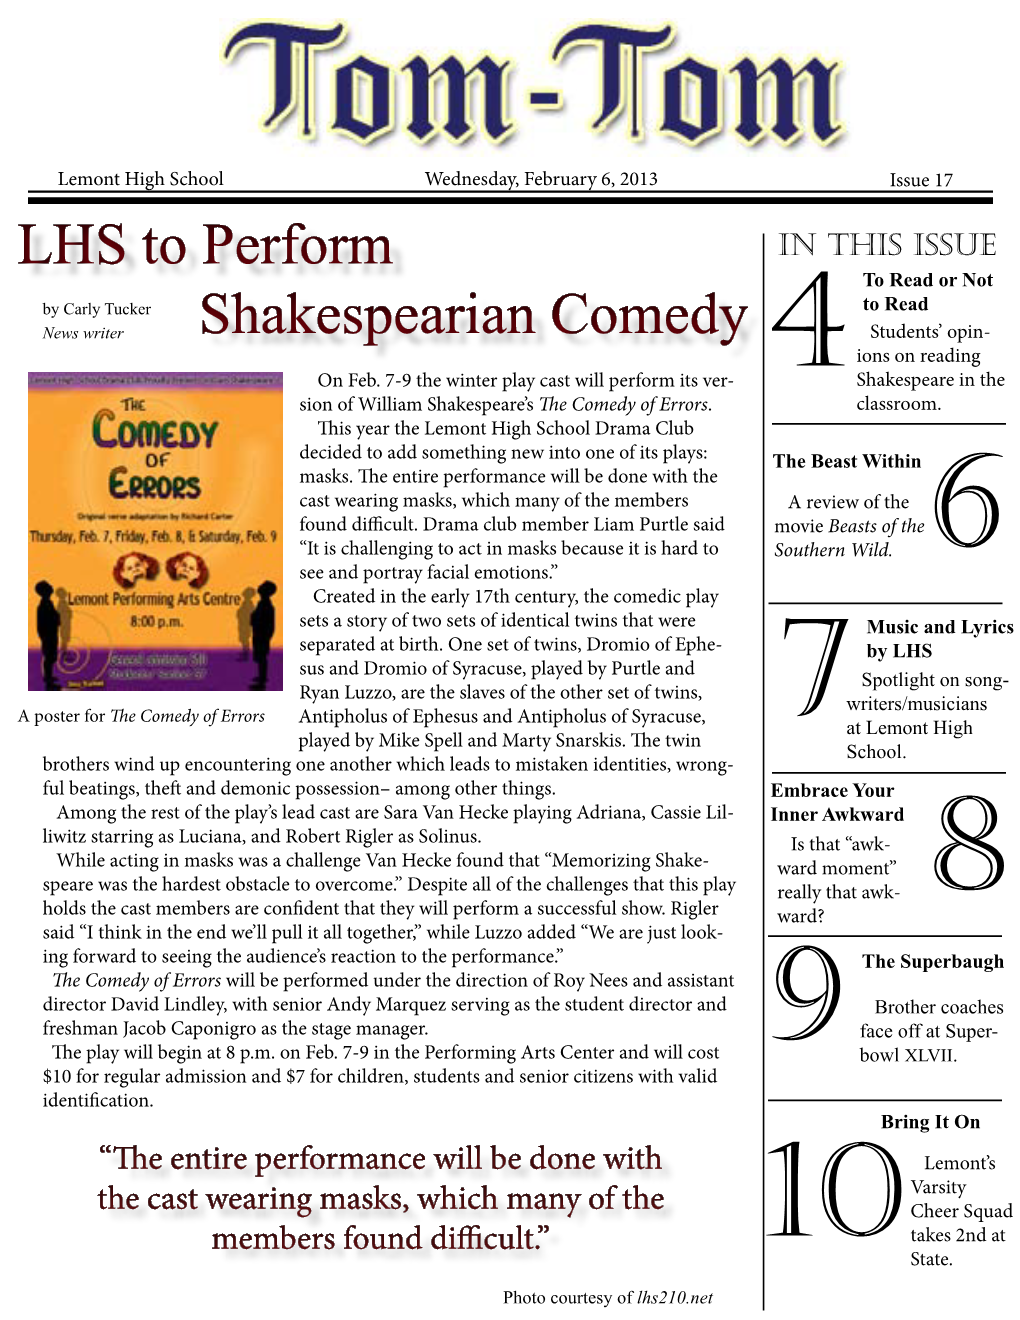 LHS to Perform Shakespearian Comedy